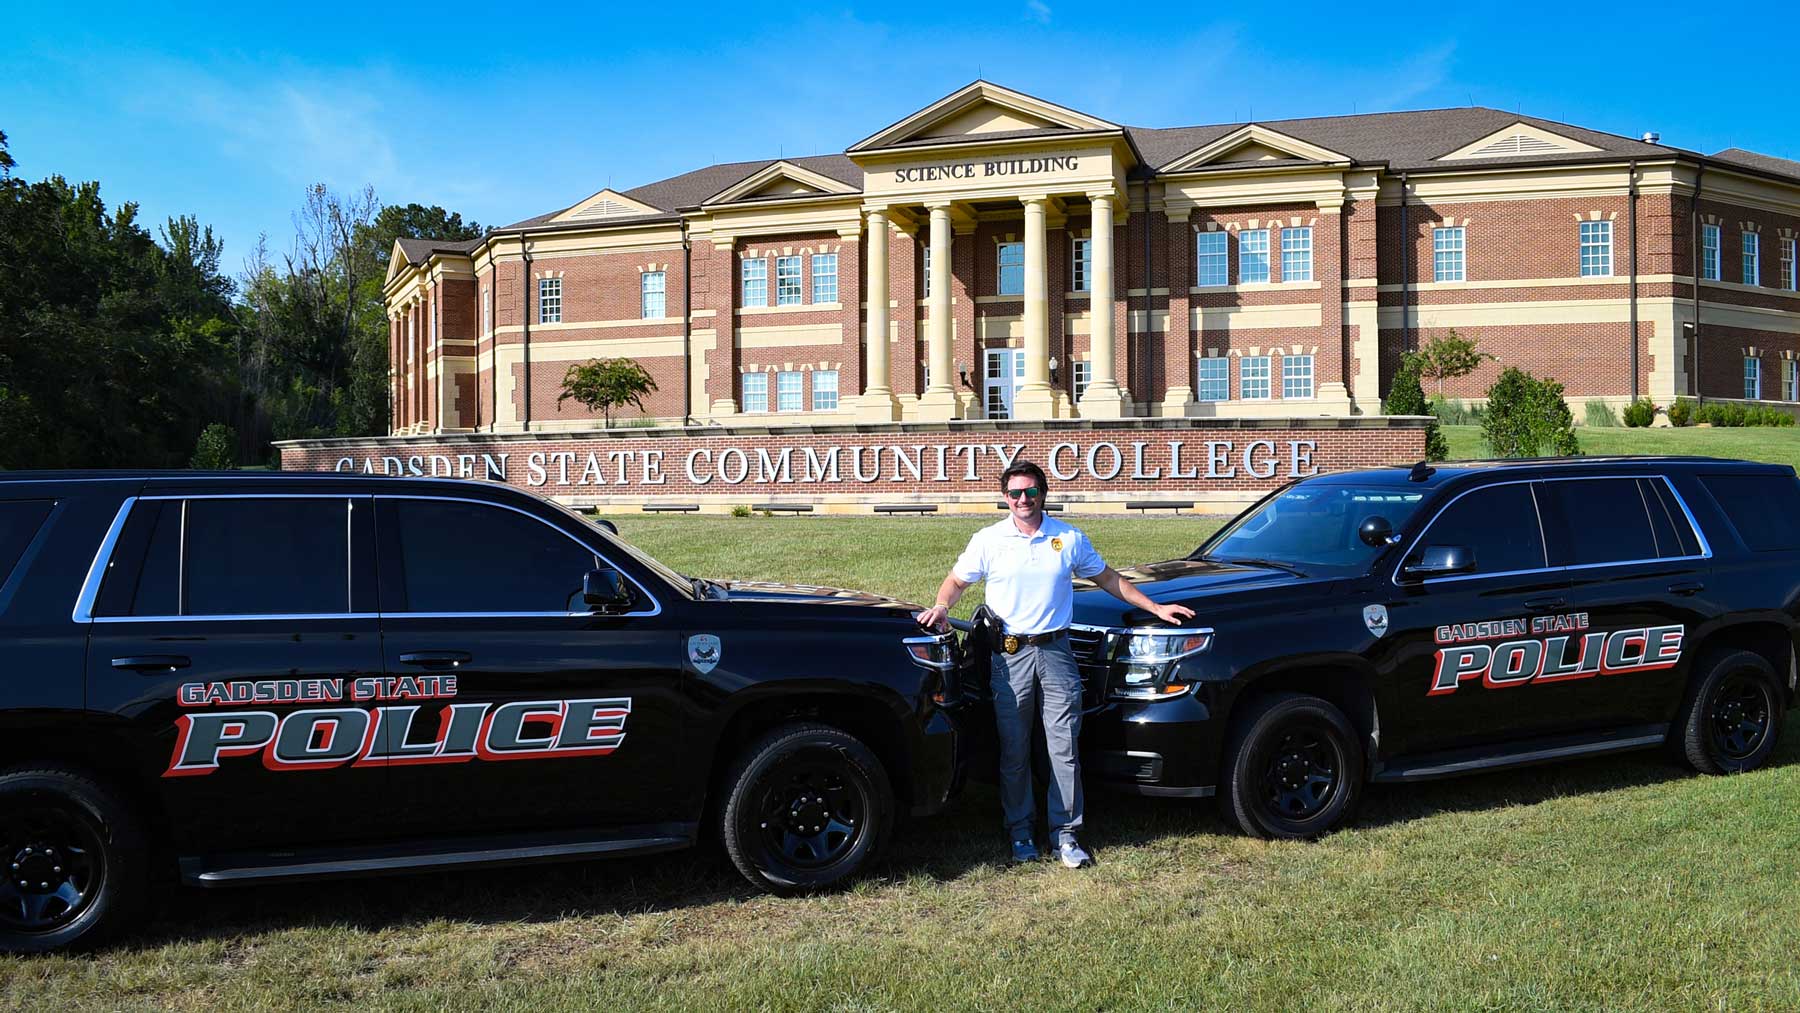 Police Chief Jay Freeman and the GSCC police vehicles in front of the Science Building